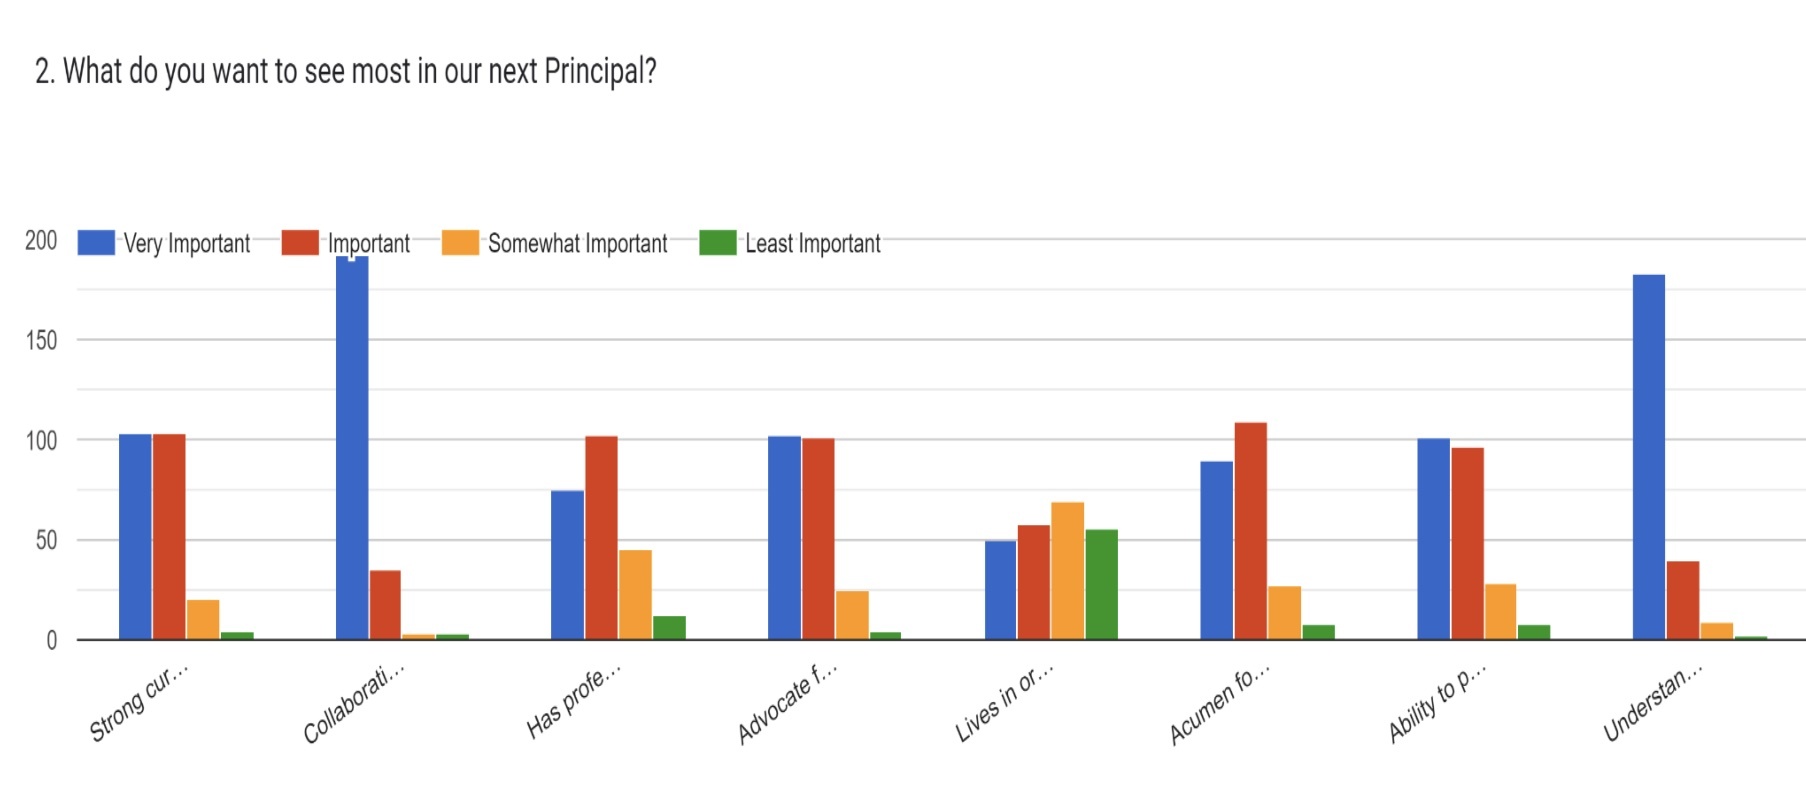 Springs School residents and staff results for what they'd like to see in the next building principal. SPRINGS SCHOOL DISTRICT